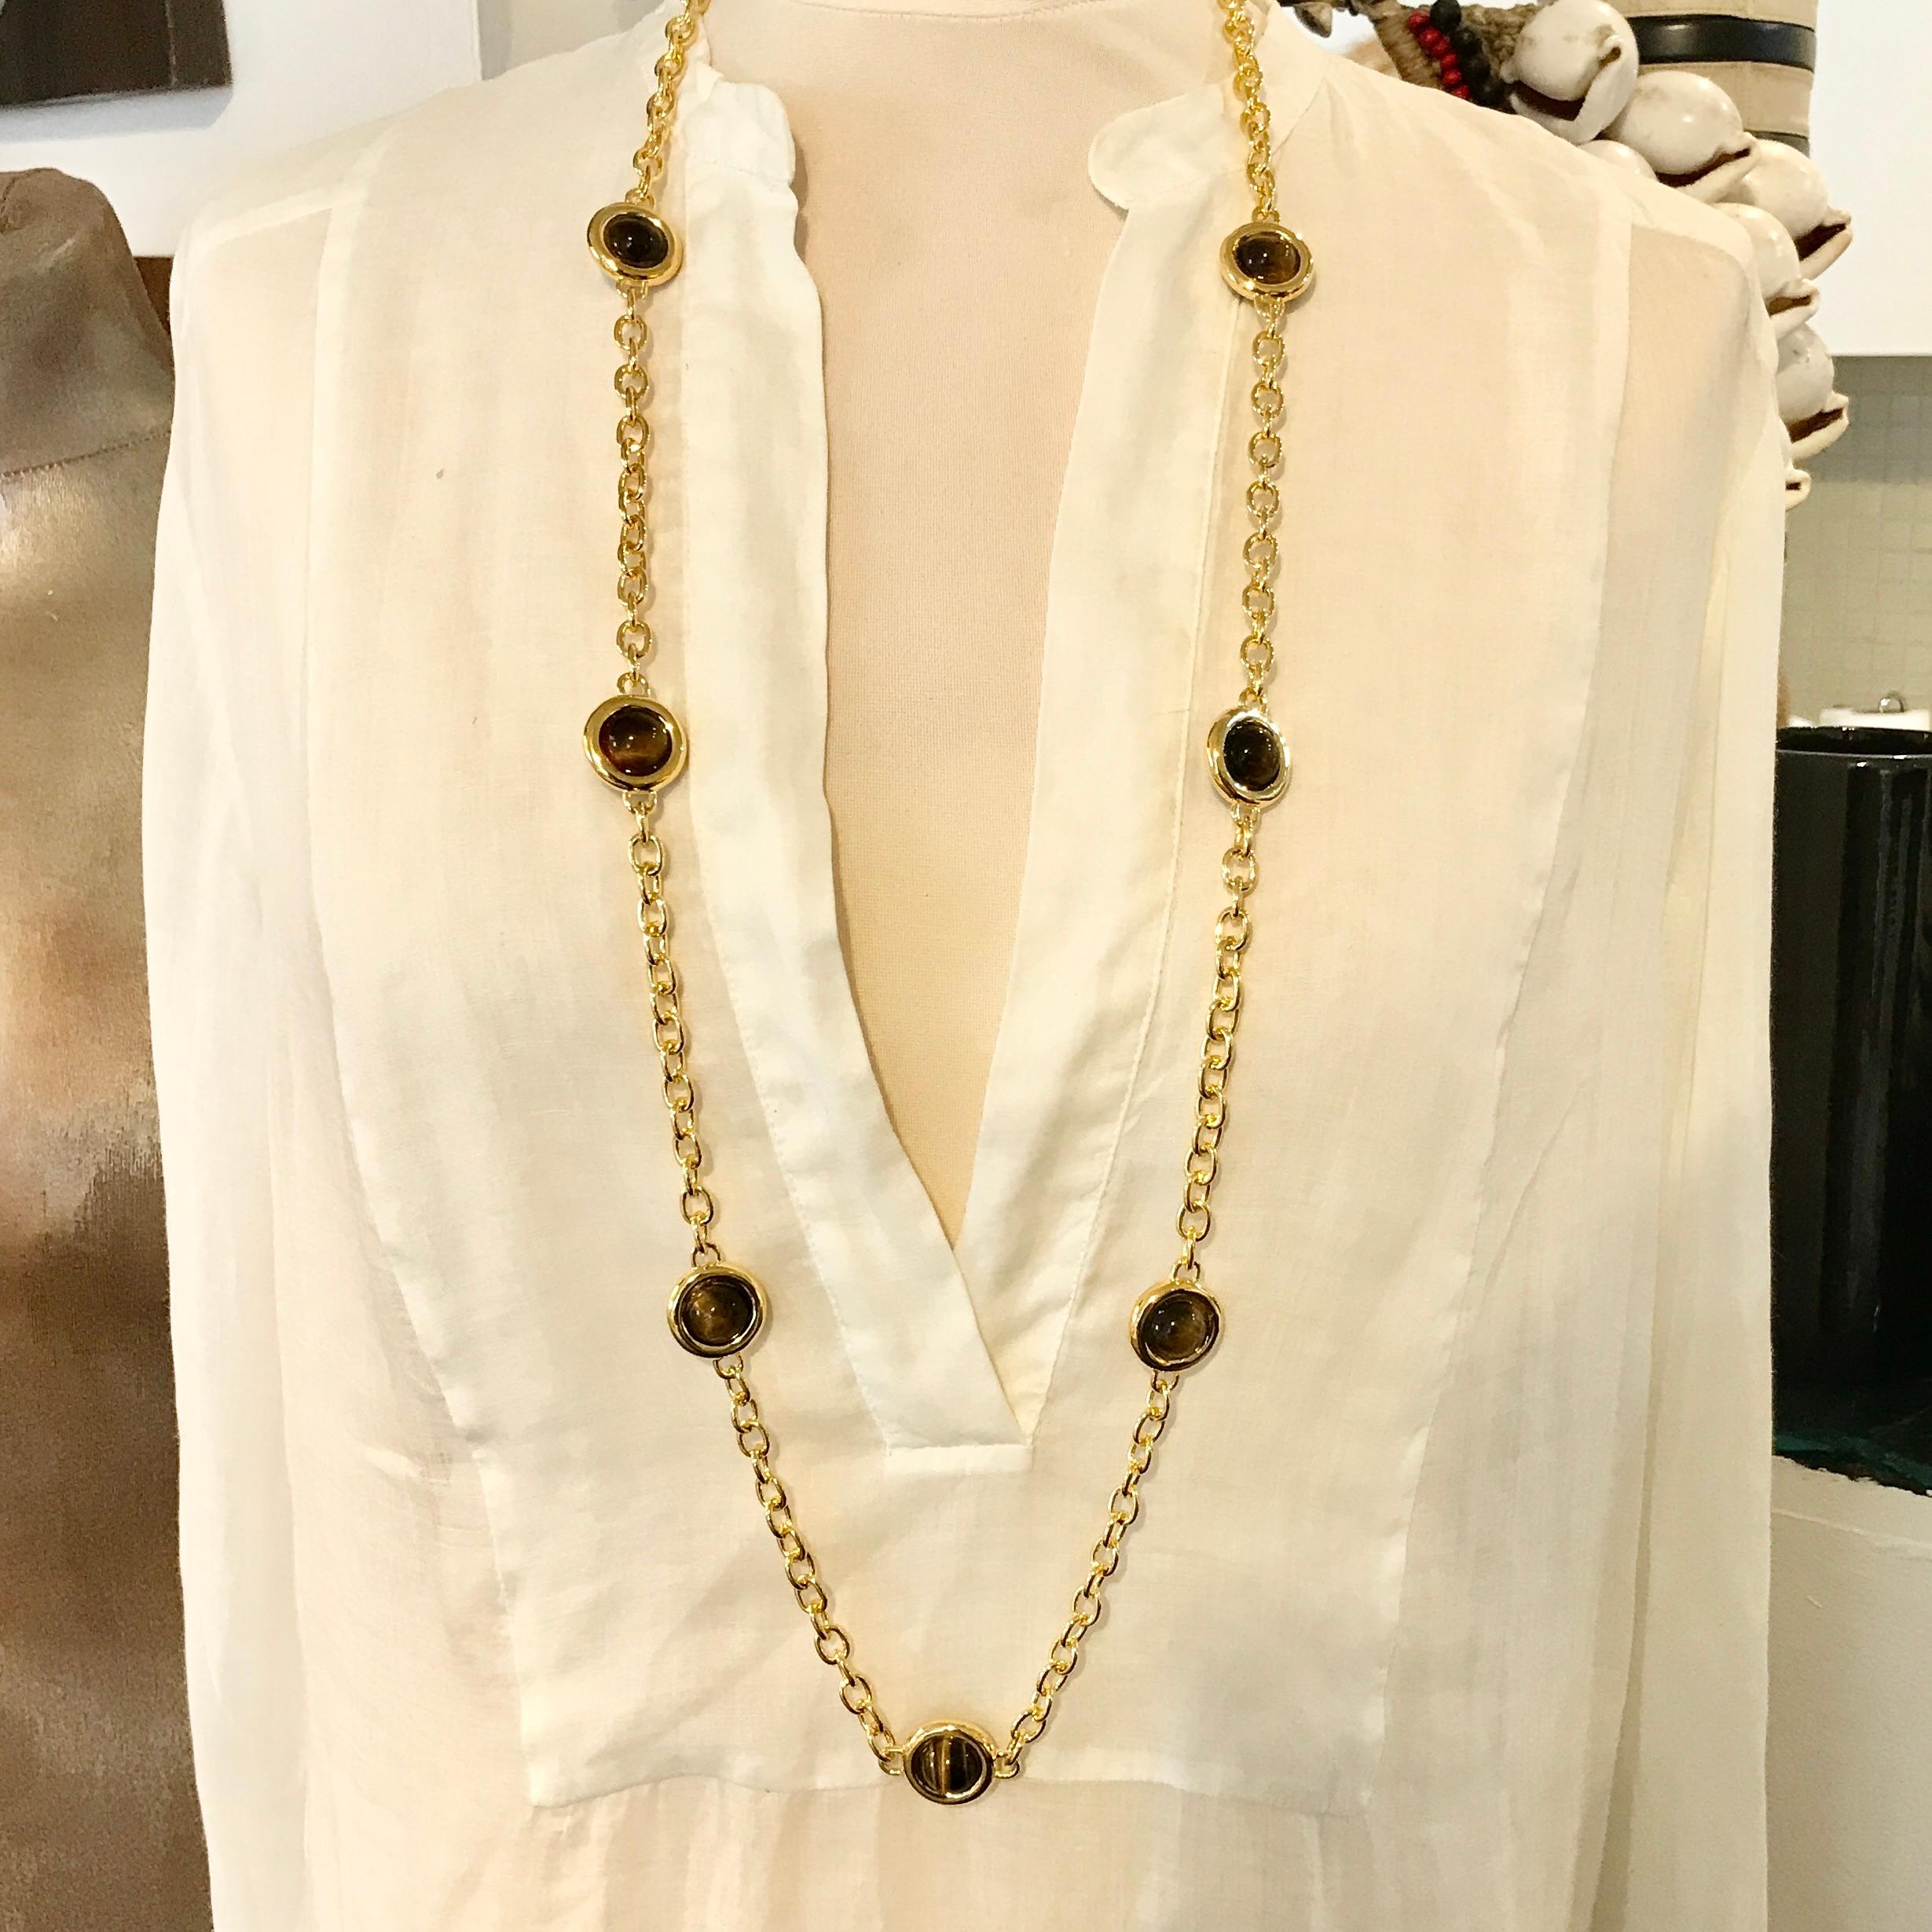 A wonderfully simple yet stylish gems long chain. 

The heavy oval belcher link chain divided by 7 rounded collets set at both sides with a fabulous round cabochon Tiger's Eye gemstone, ending in a 'T-Bar' toggle clasp.

This is a very substantial